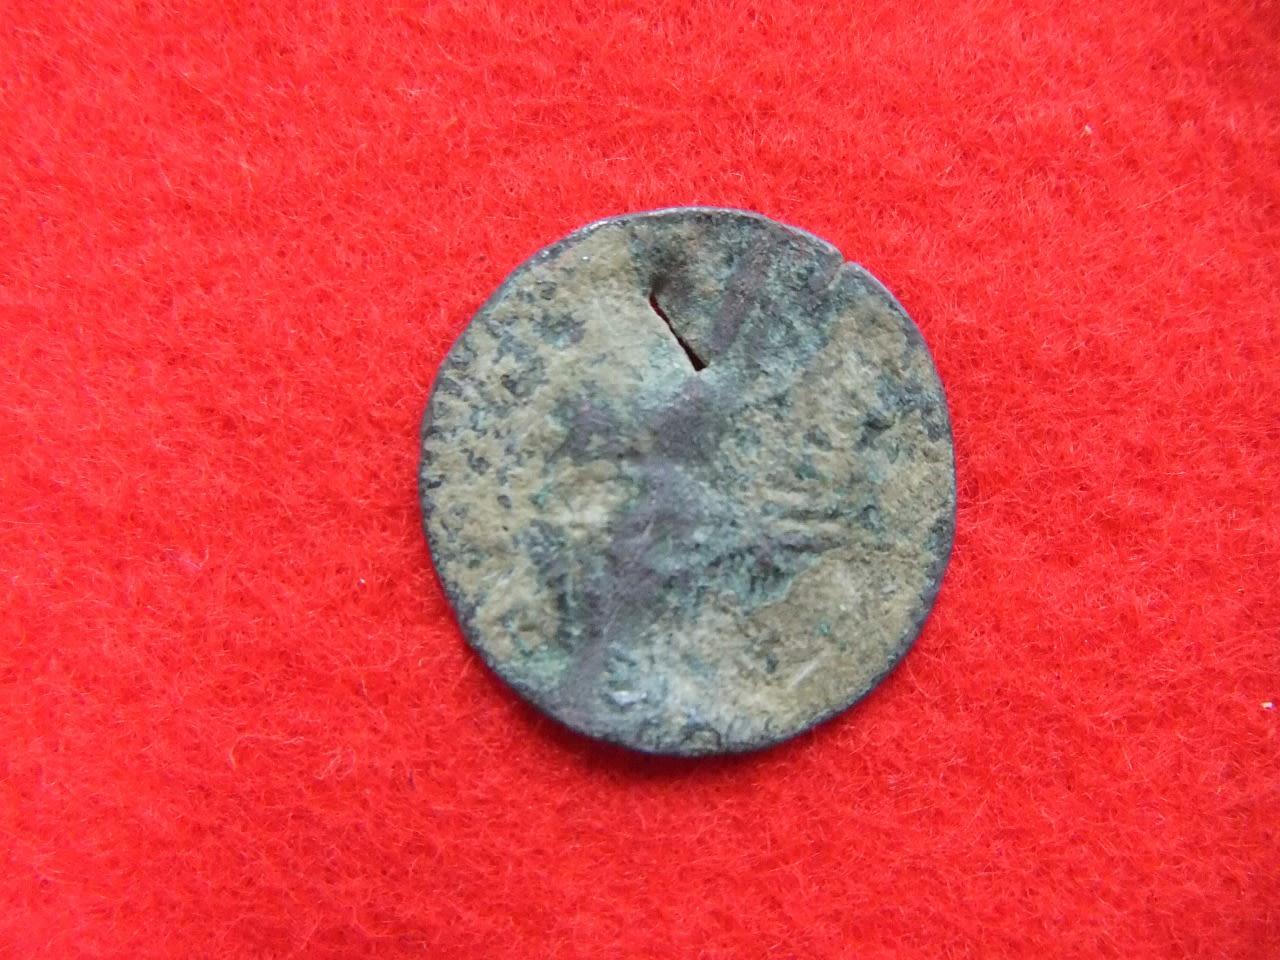 <a href="https://edition.cnn.com/style/article/ancient-roman-coins-japan/index.html" target="_blank">Ancient Roman coins </a>were recently discovered in Okinawa, Japan. This image shows the front of a Roman coin. The front of an Ottoman coin. One of the ten ancient coins that were discovered in <a href="https://edition.cnn.com/style/article/ancient-roman-coins-japan/index.html" target="_blank">Katsuren castle</a>.